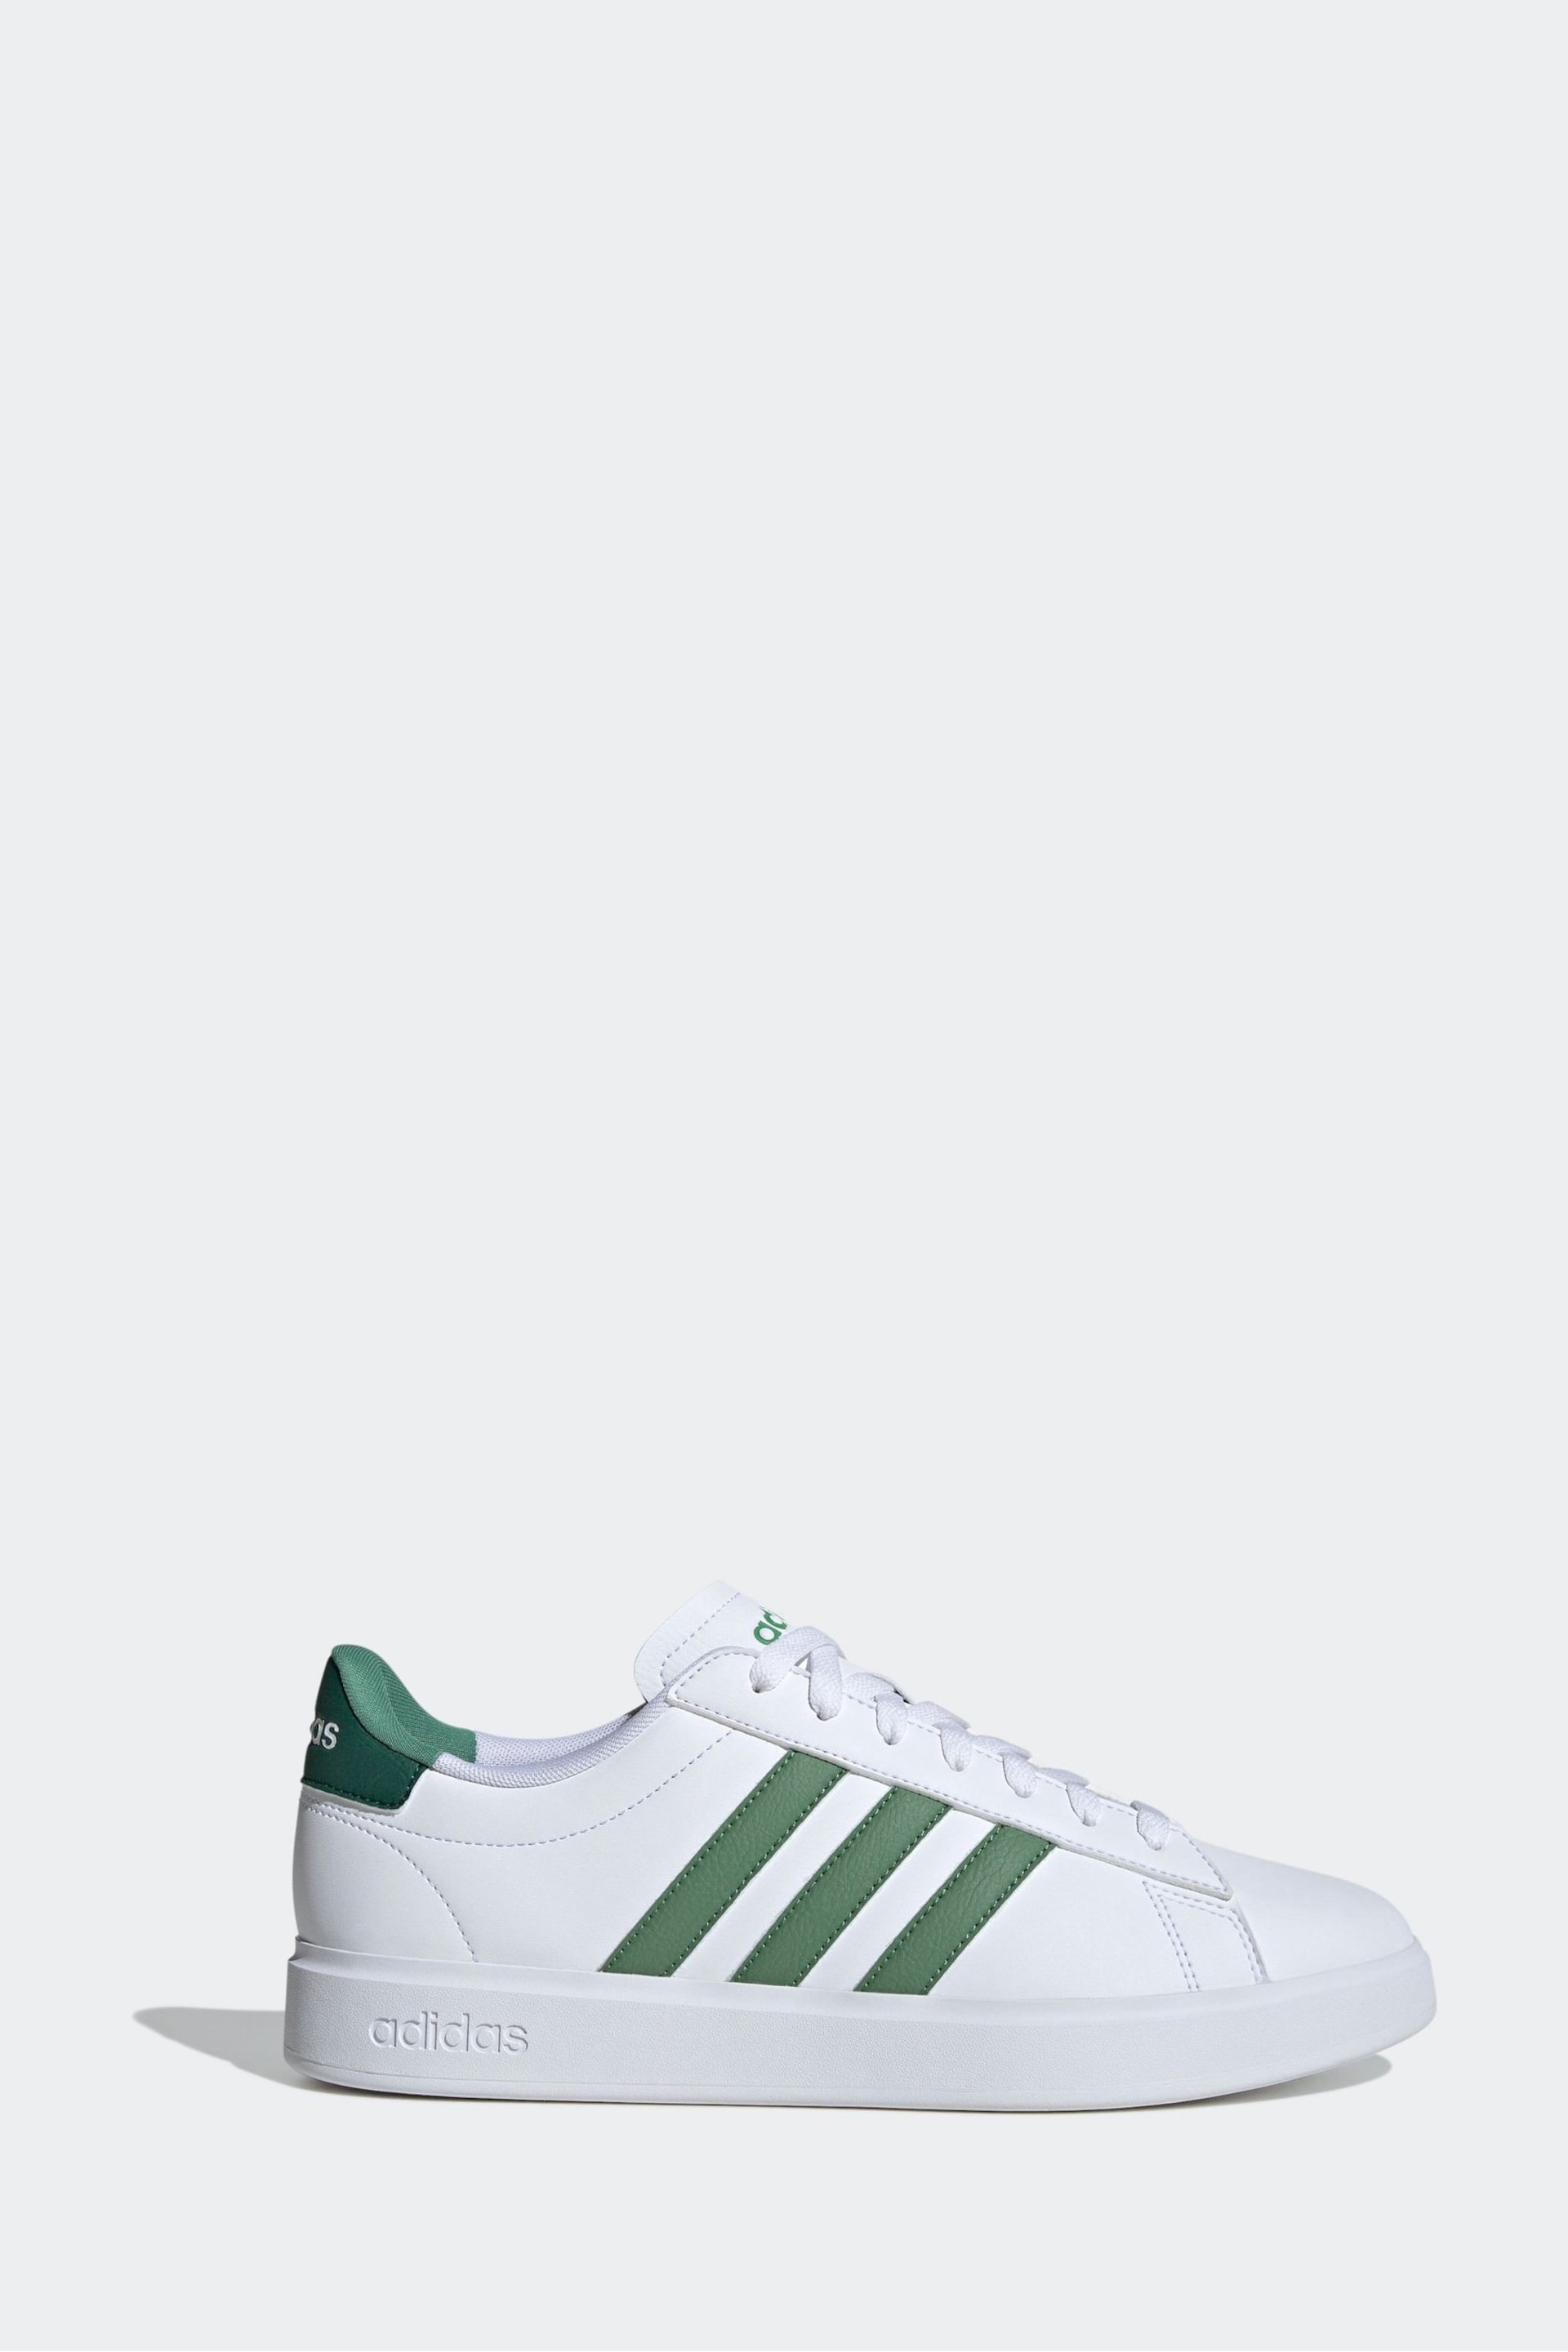 adidas Green White Sportswear Grand Court 2.0 Trainers - Image 1 of 7